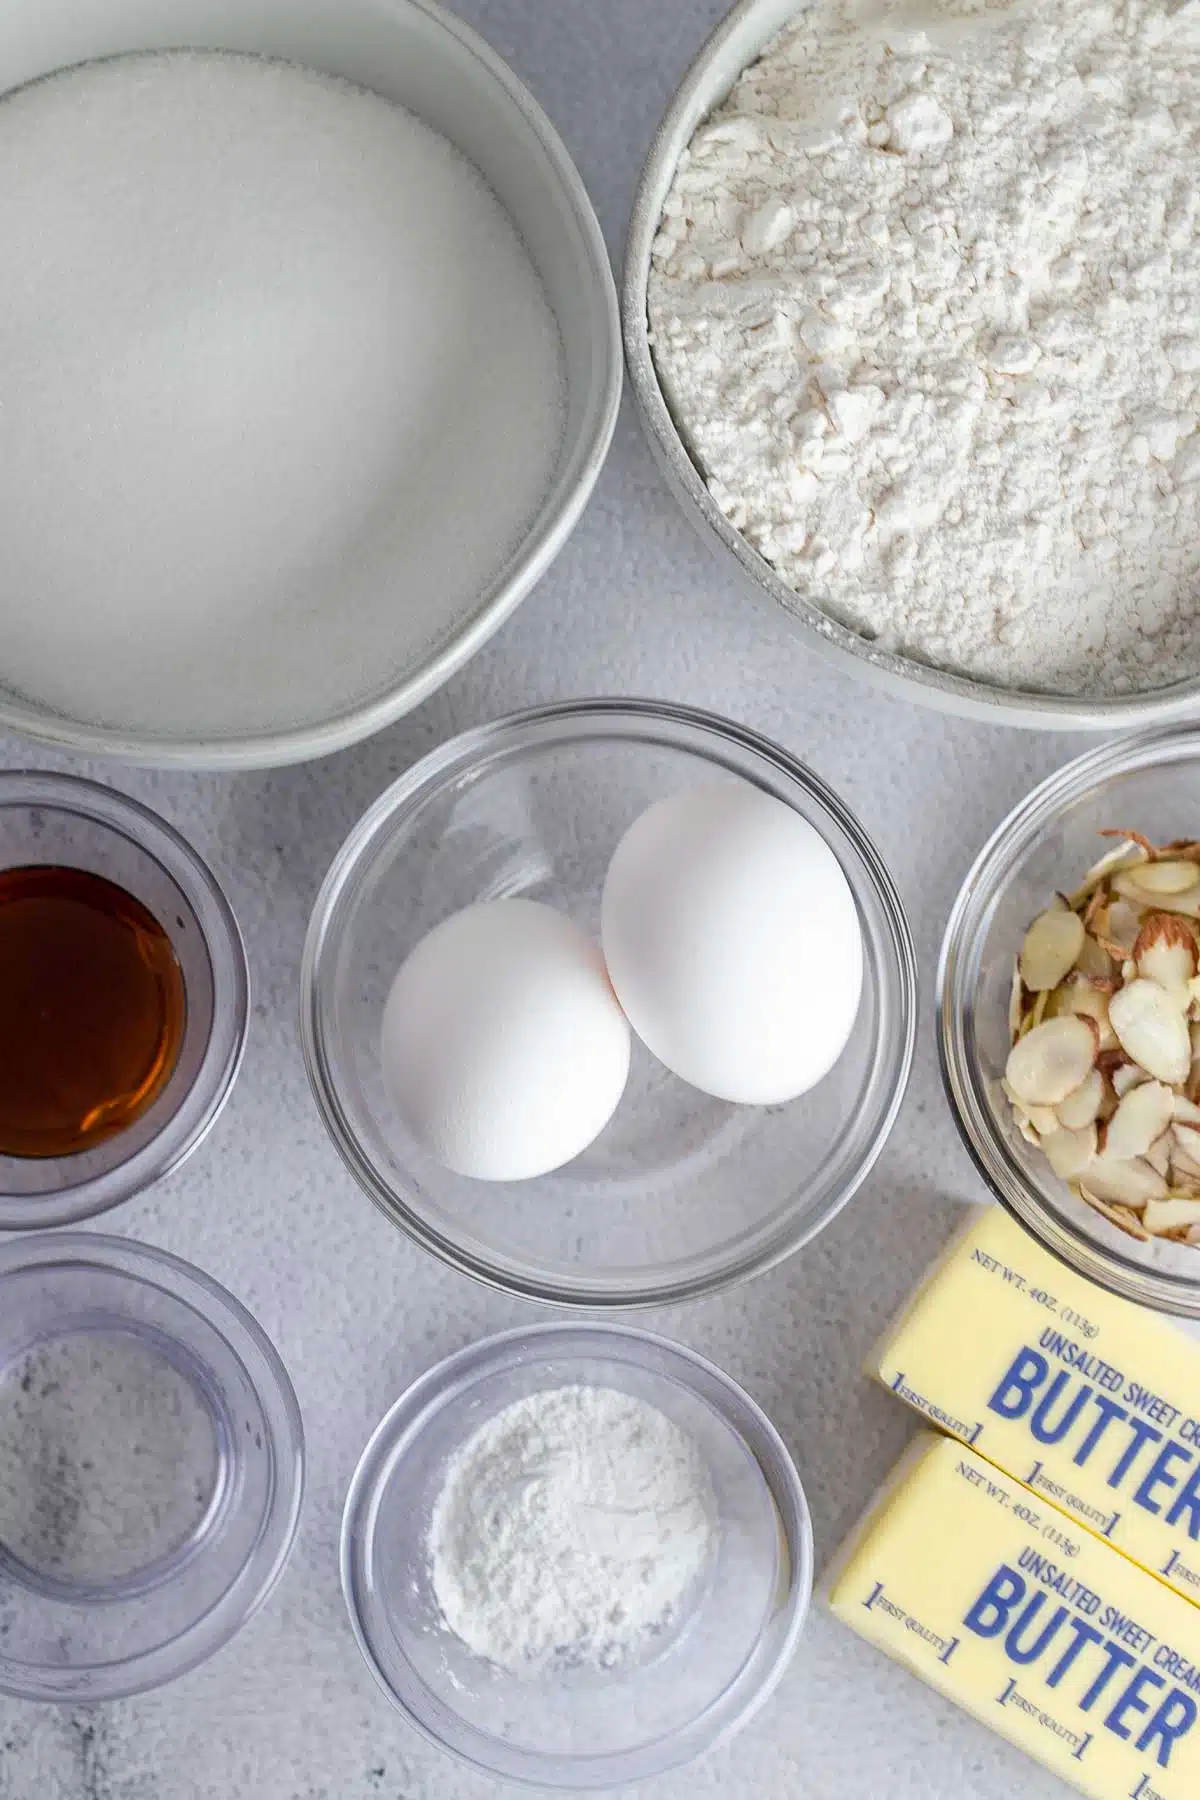 Tall image of Dutch butter cake ingredients.